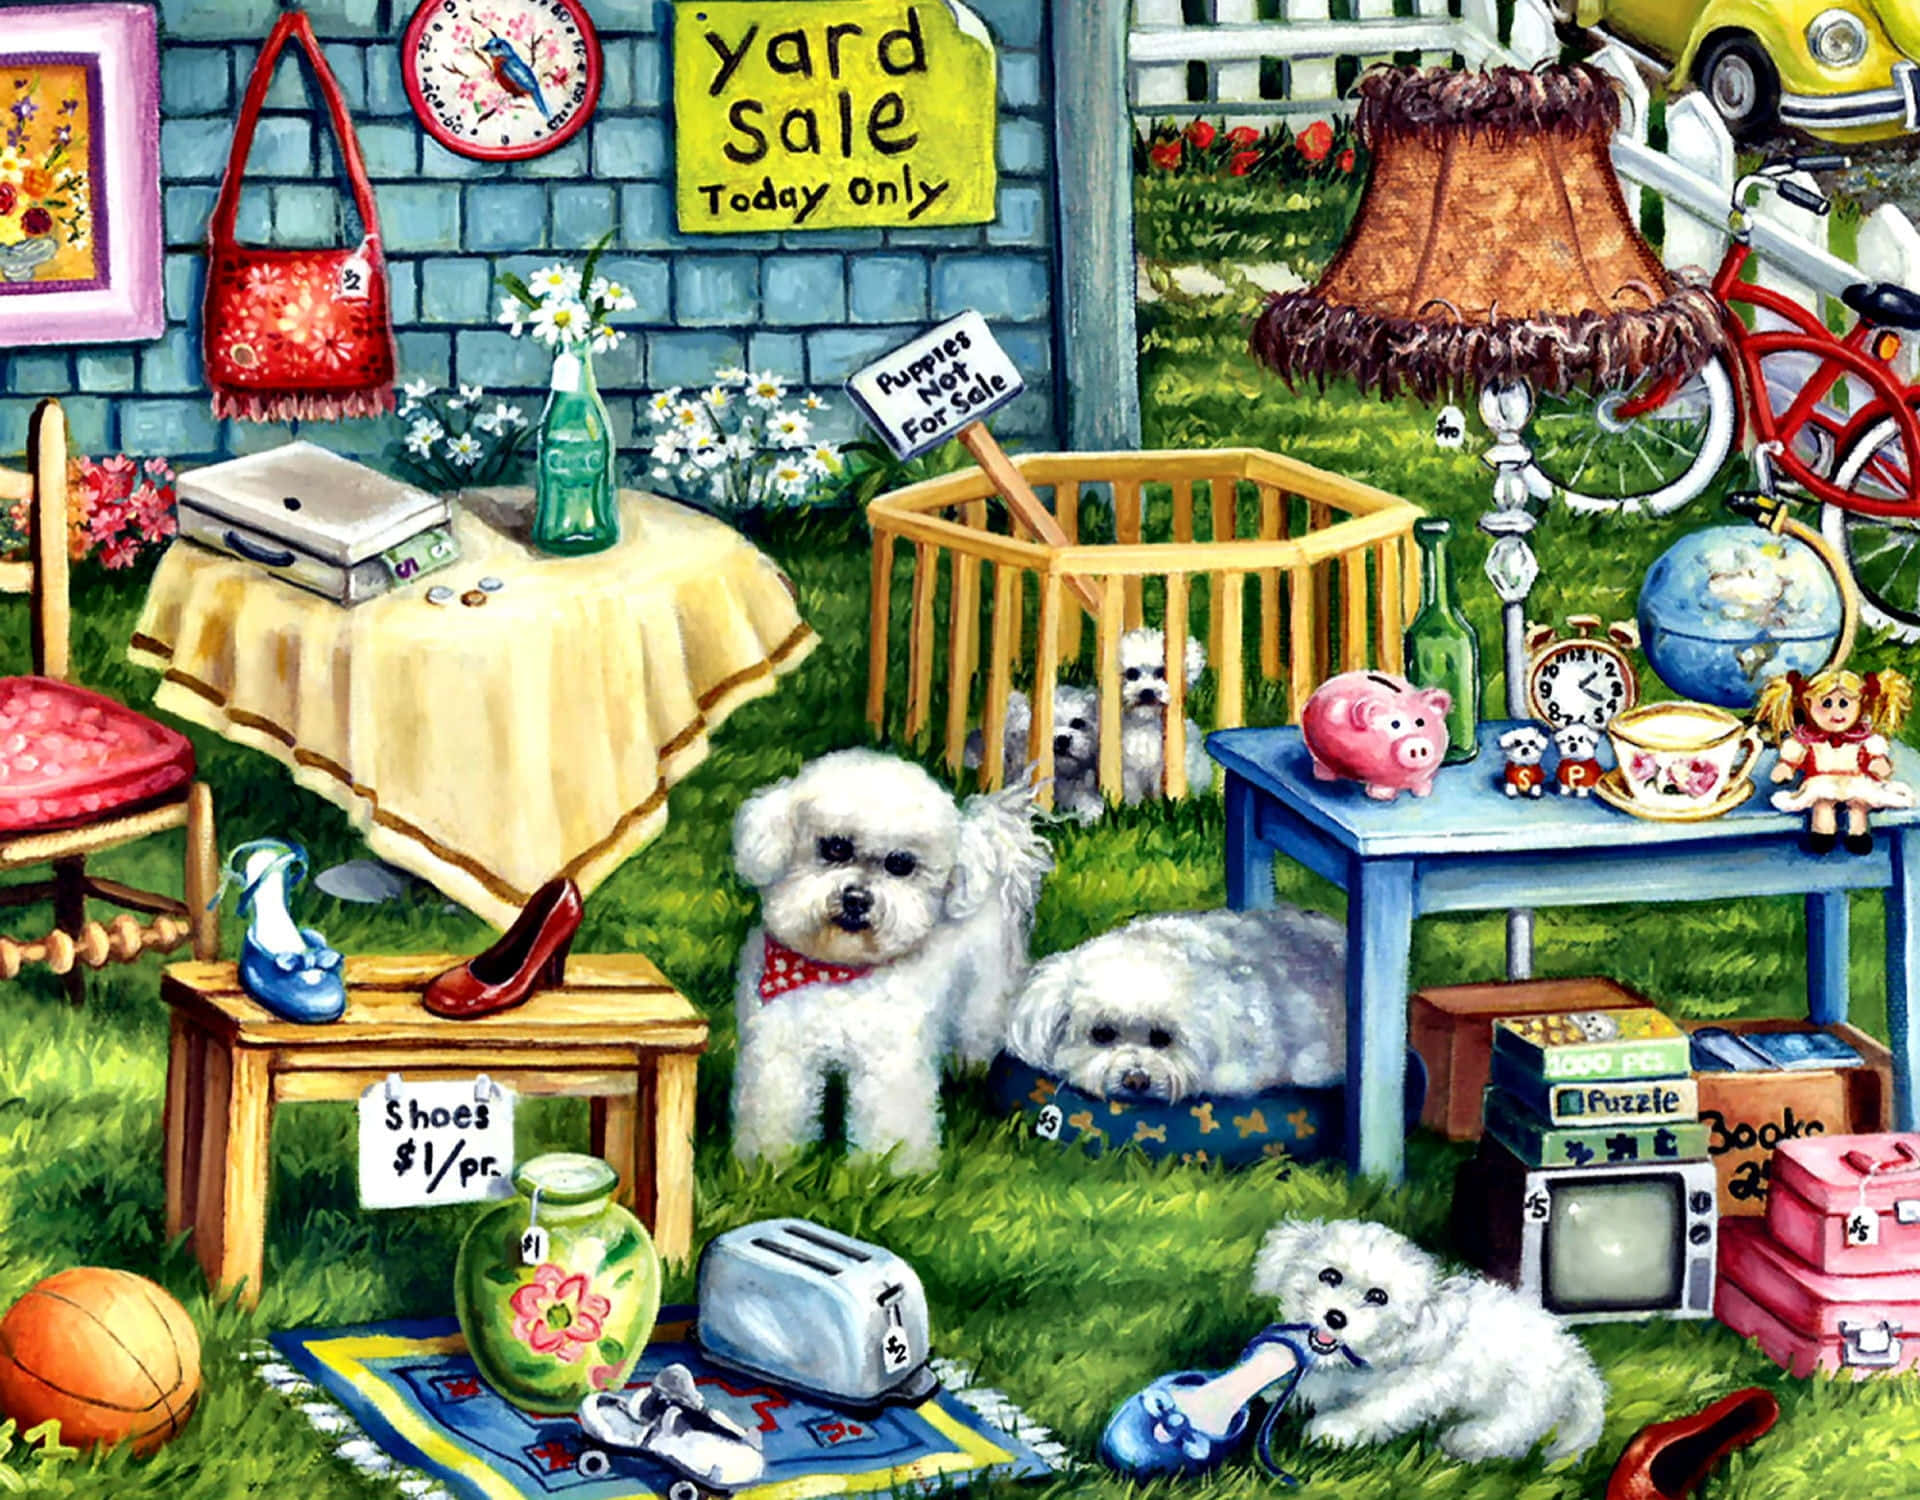 Yard Sale With Puppies Picture